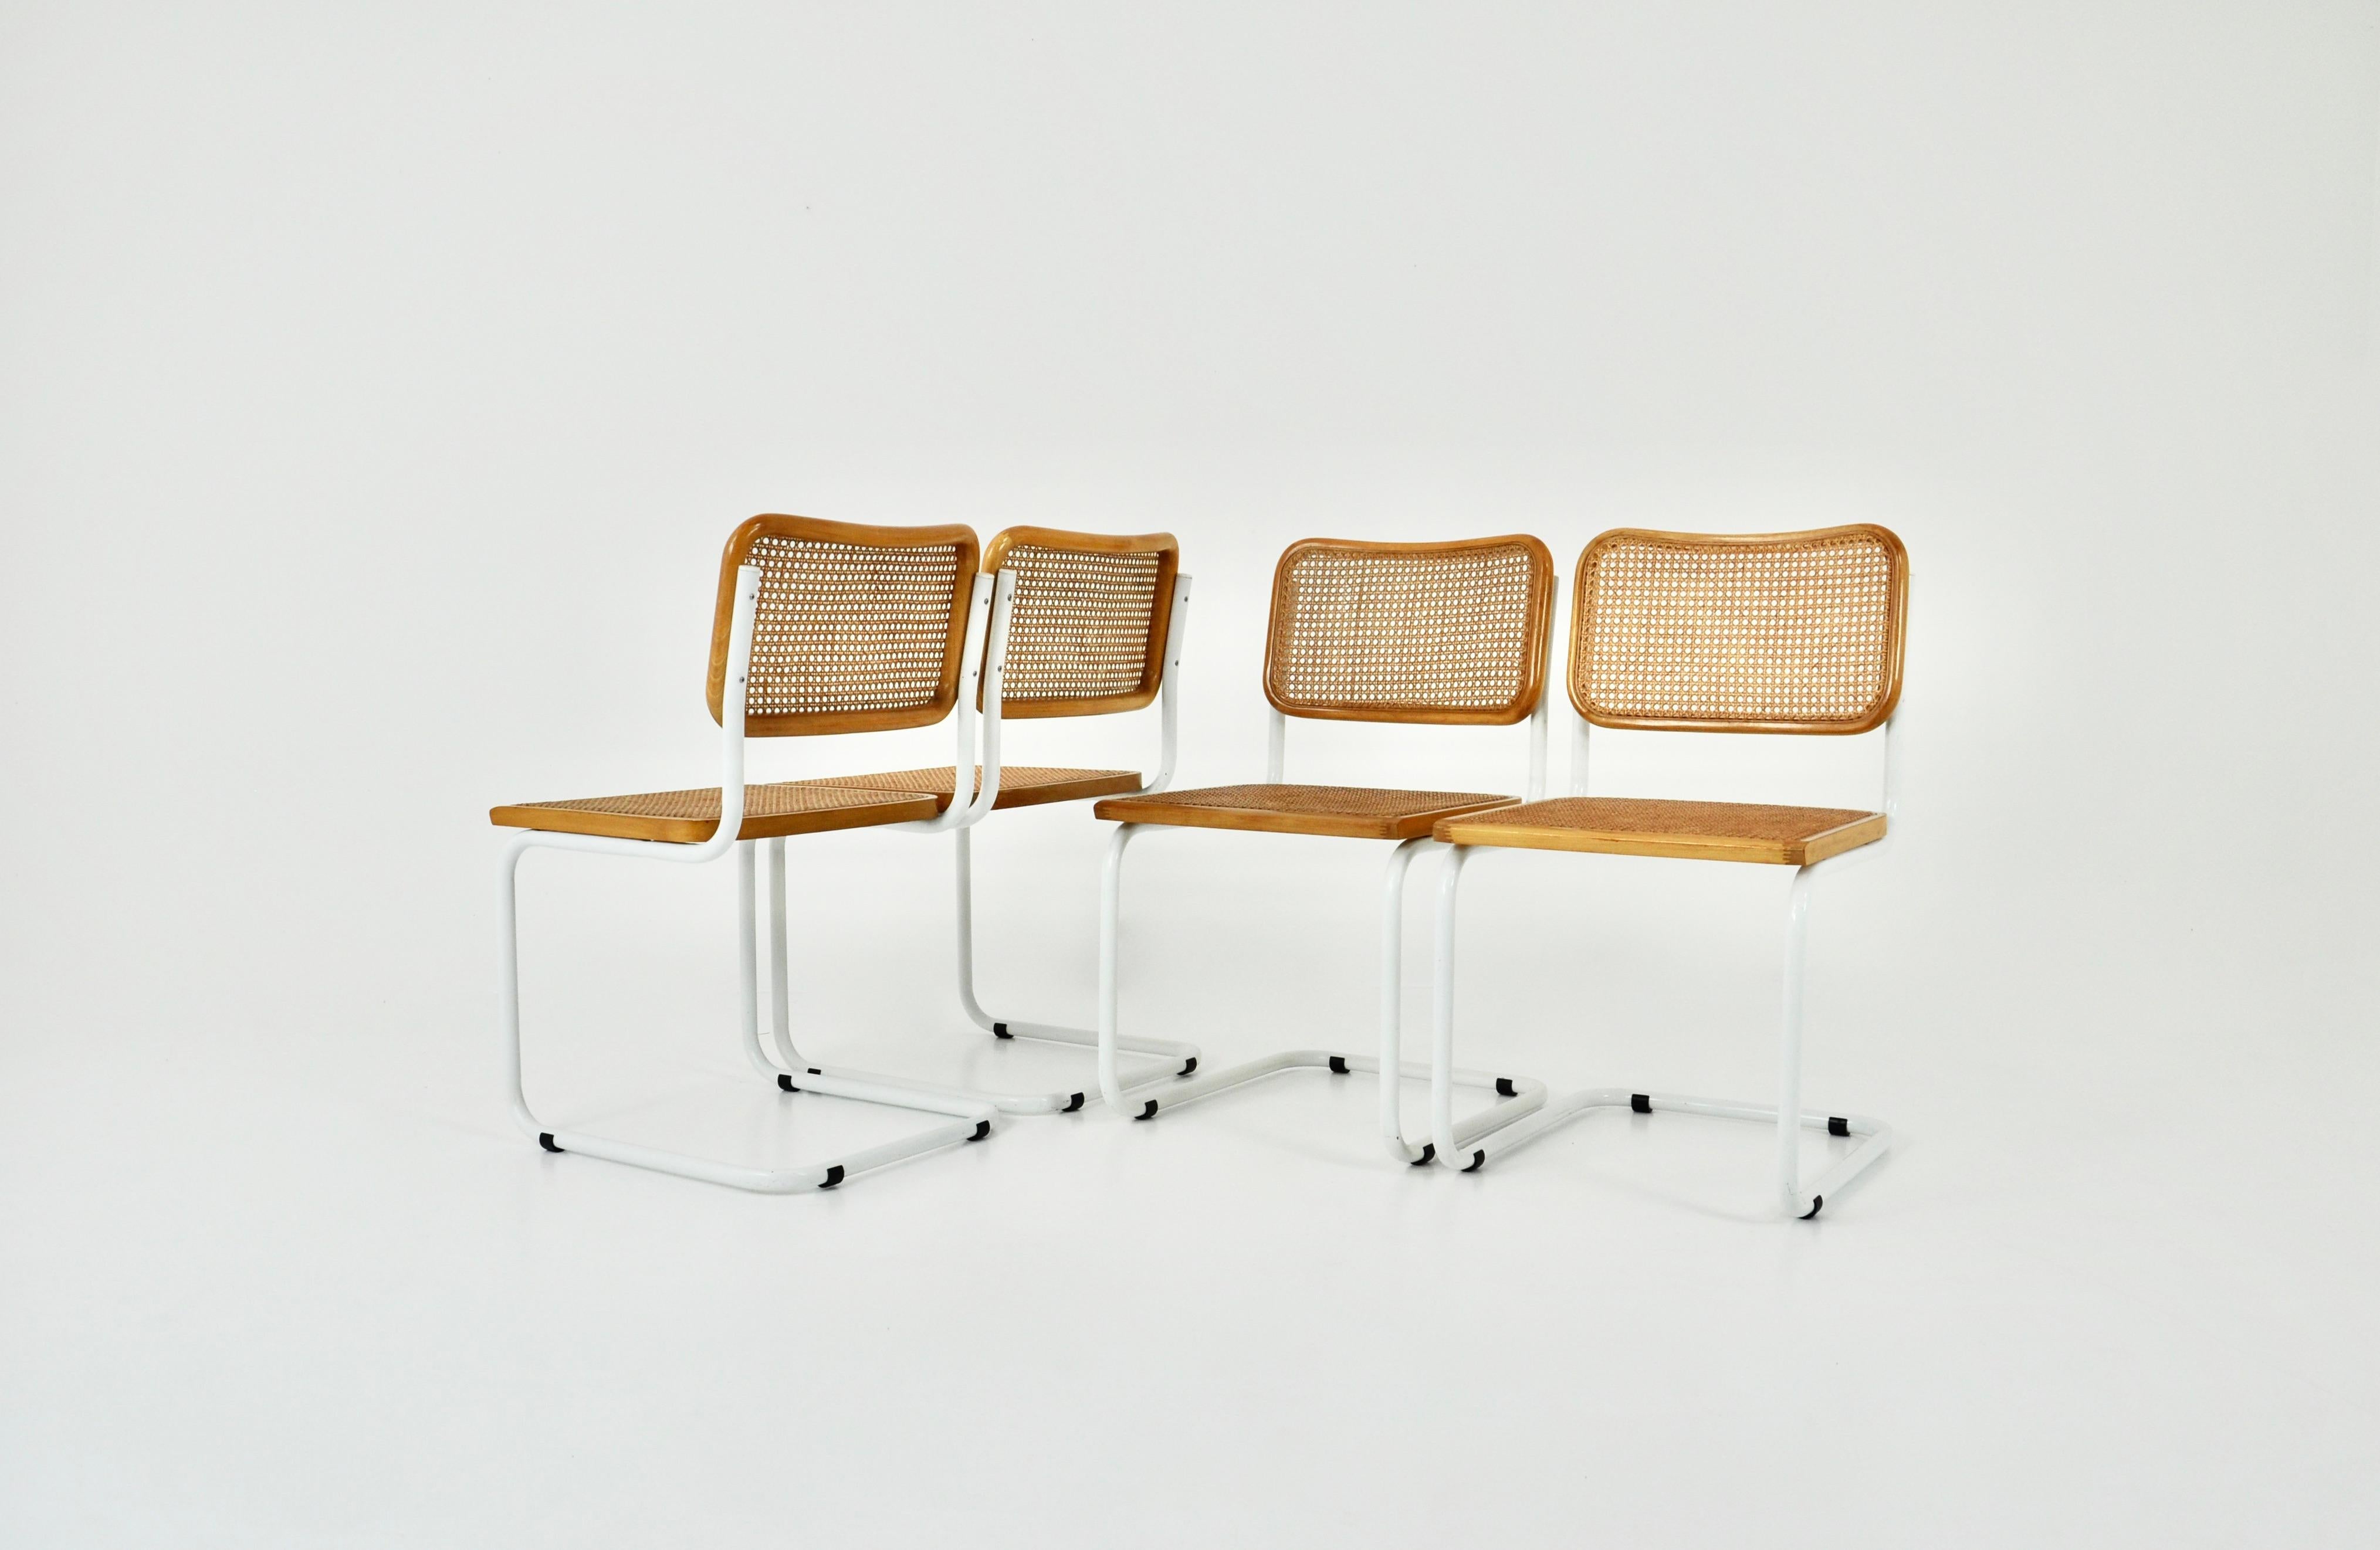 Set of 4 chairs in white metal, wood and cane. Wear due to time and age of the chairs. 
Measure: seat height: 45 cm.
Usure due au temps et l'âge des chaises.